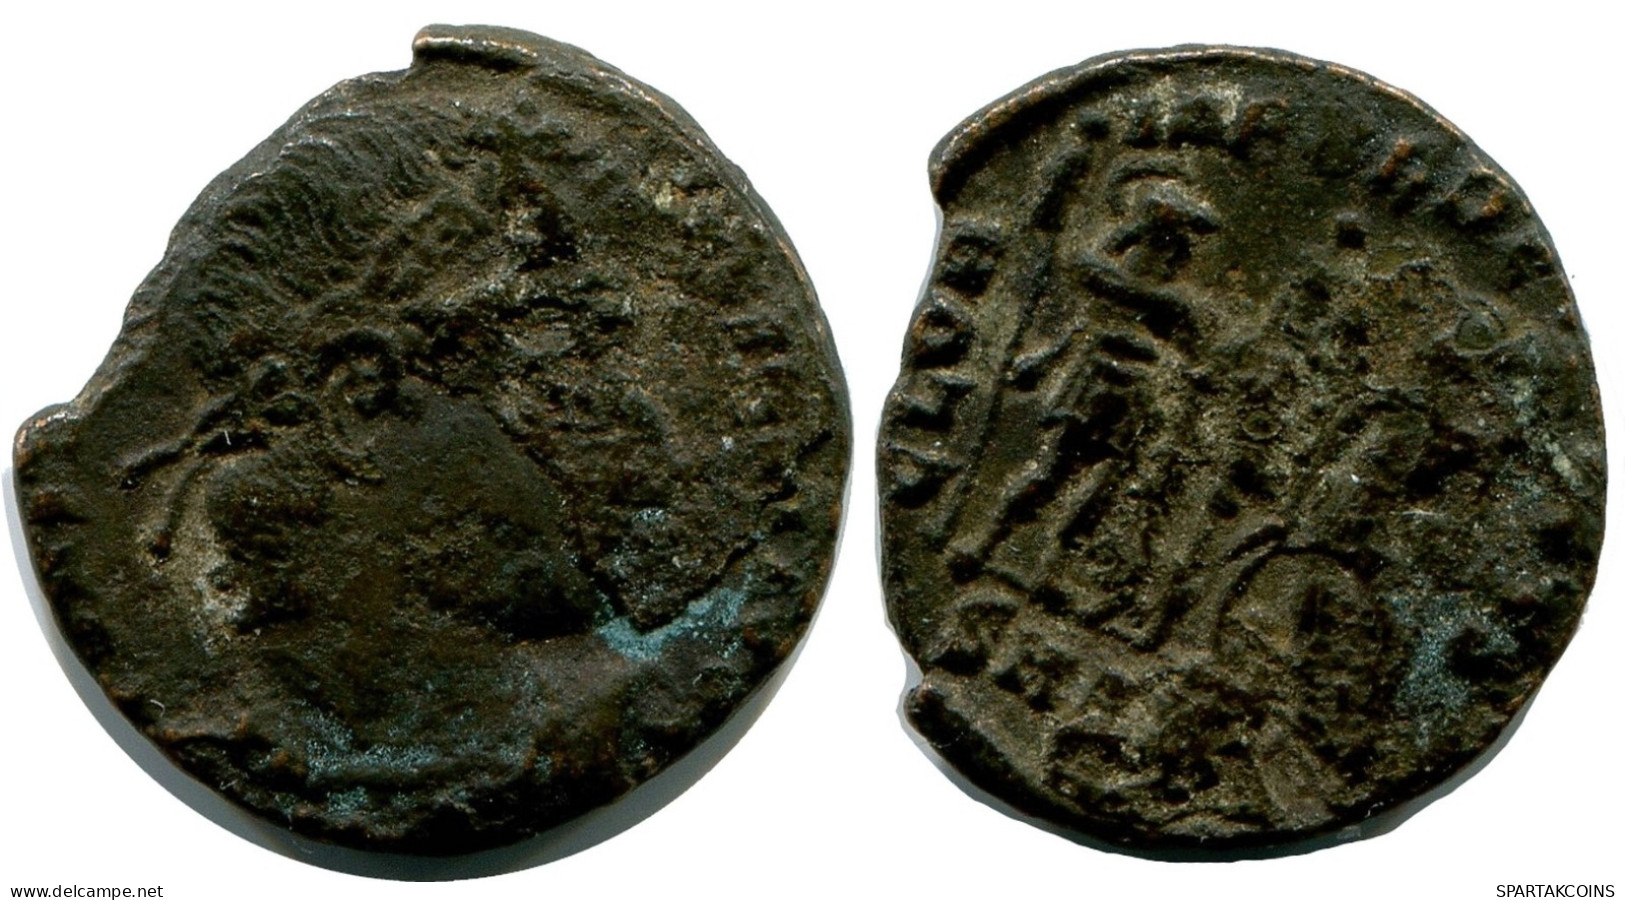 ROMAN Pièce MINTED IN ALEKSANDRIA FROM THE ROYAL ONTARIO MUSEUM #ANC10175.14.F.A - El Imperio Christiano (307 / 363)